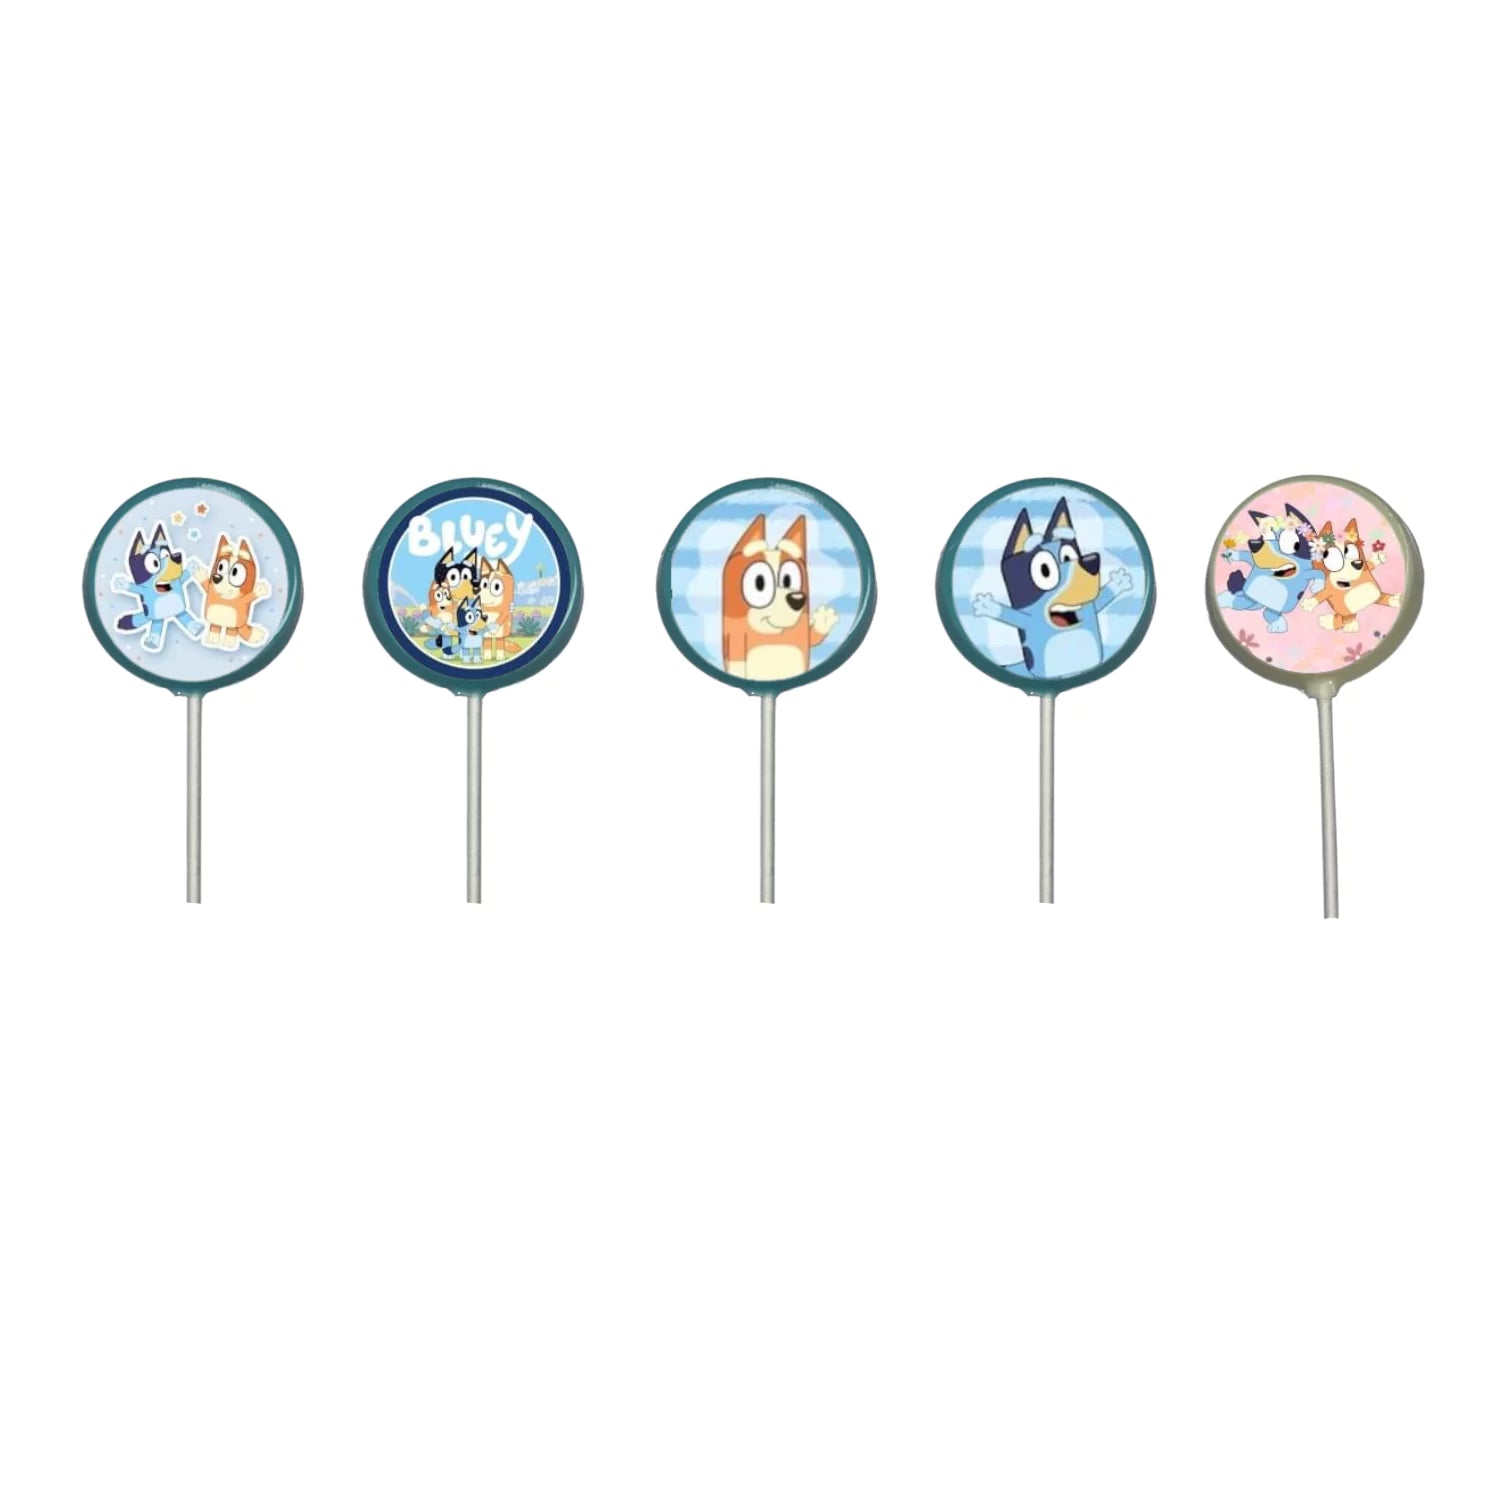 Edible Bluey Characters Images White Chocolate Lollipop Suckers 1.0oz 3 inch